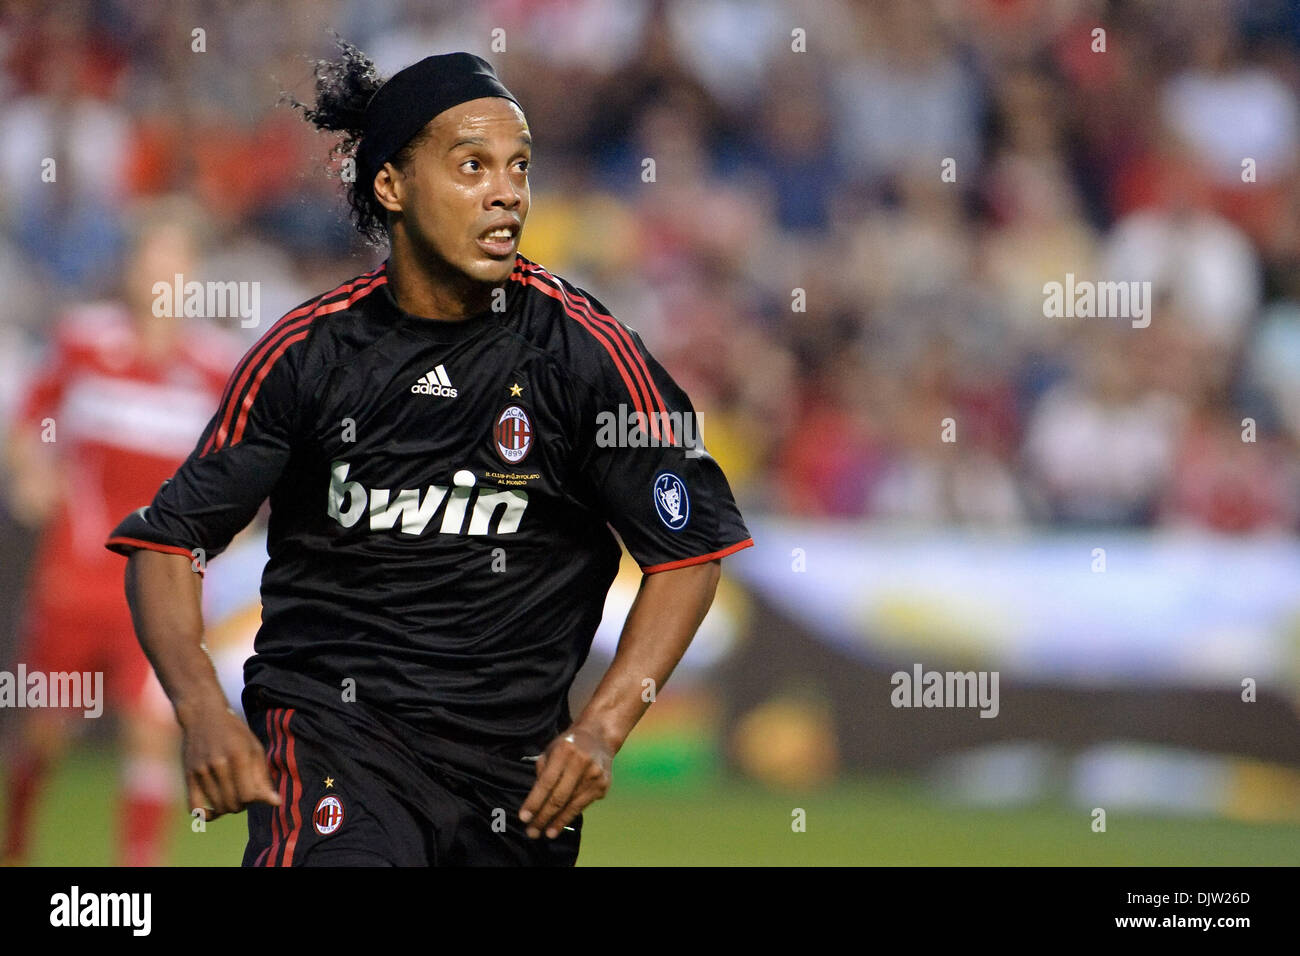 30 May2010 AC Milan's Ronaldinho (80) during the friendly match